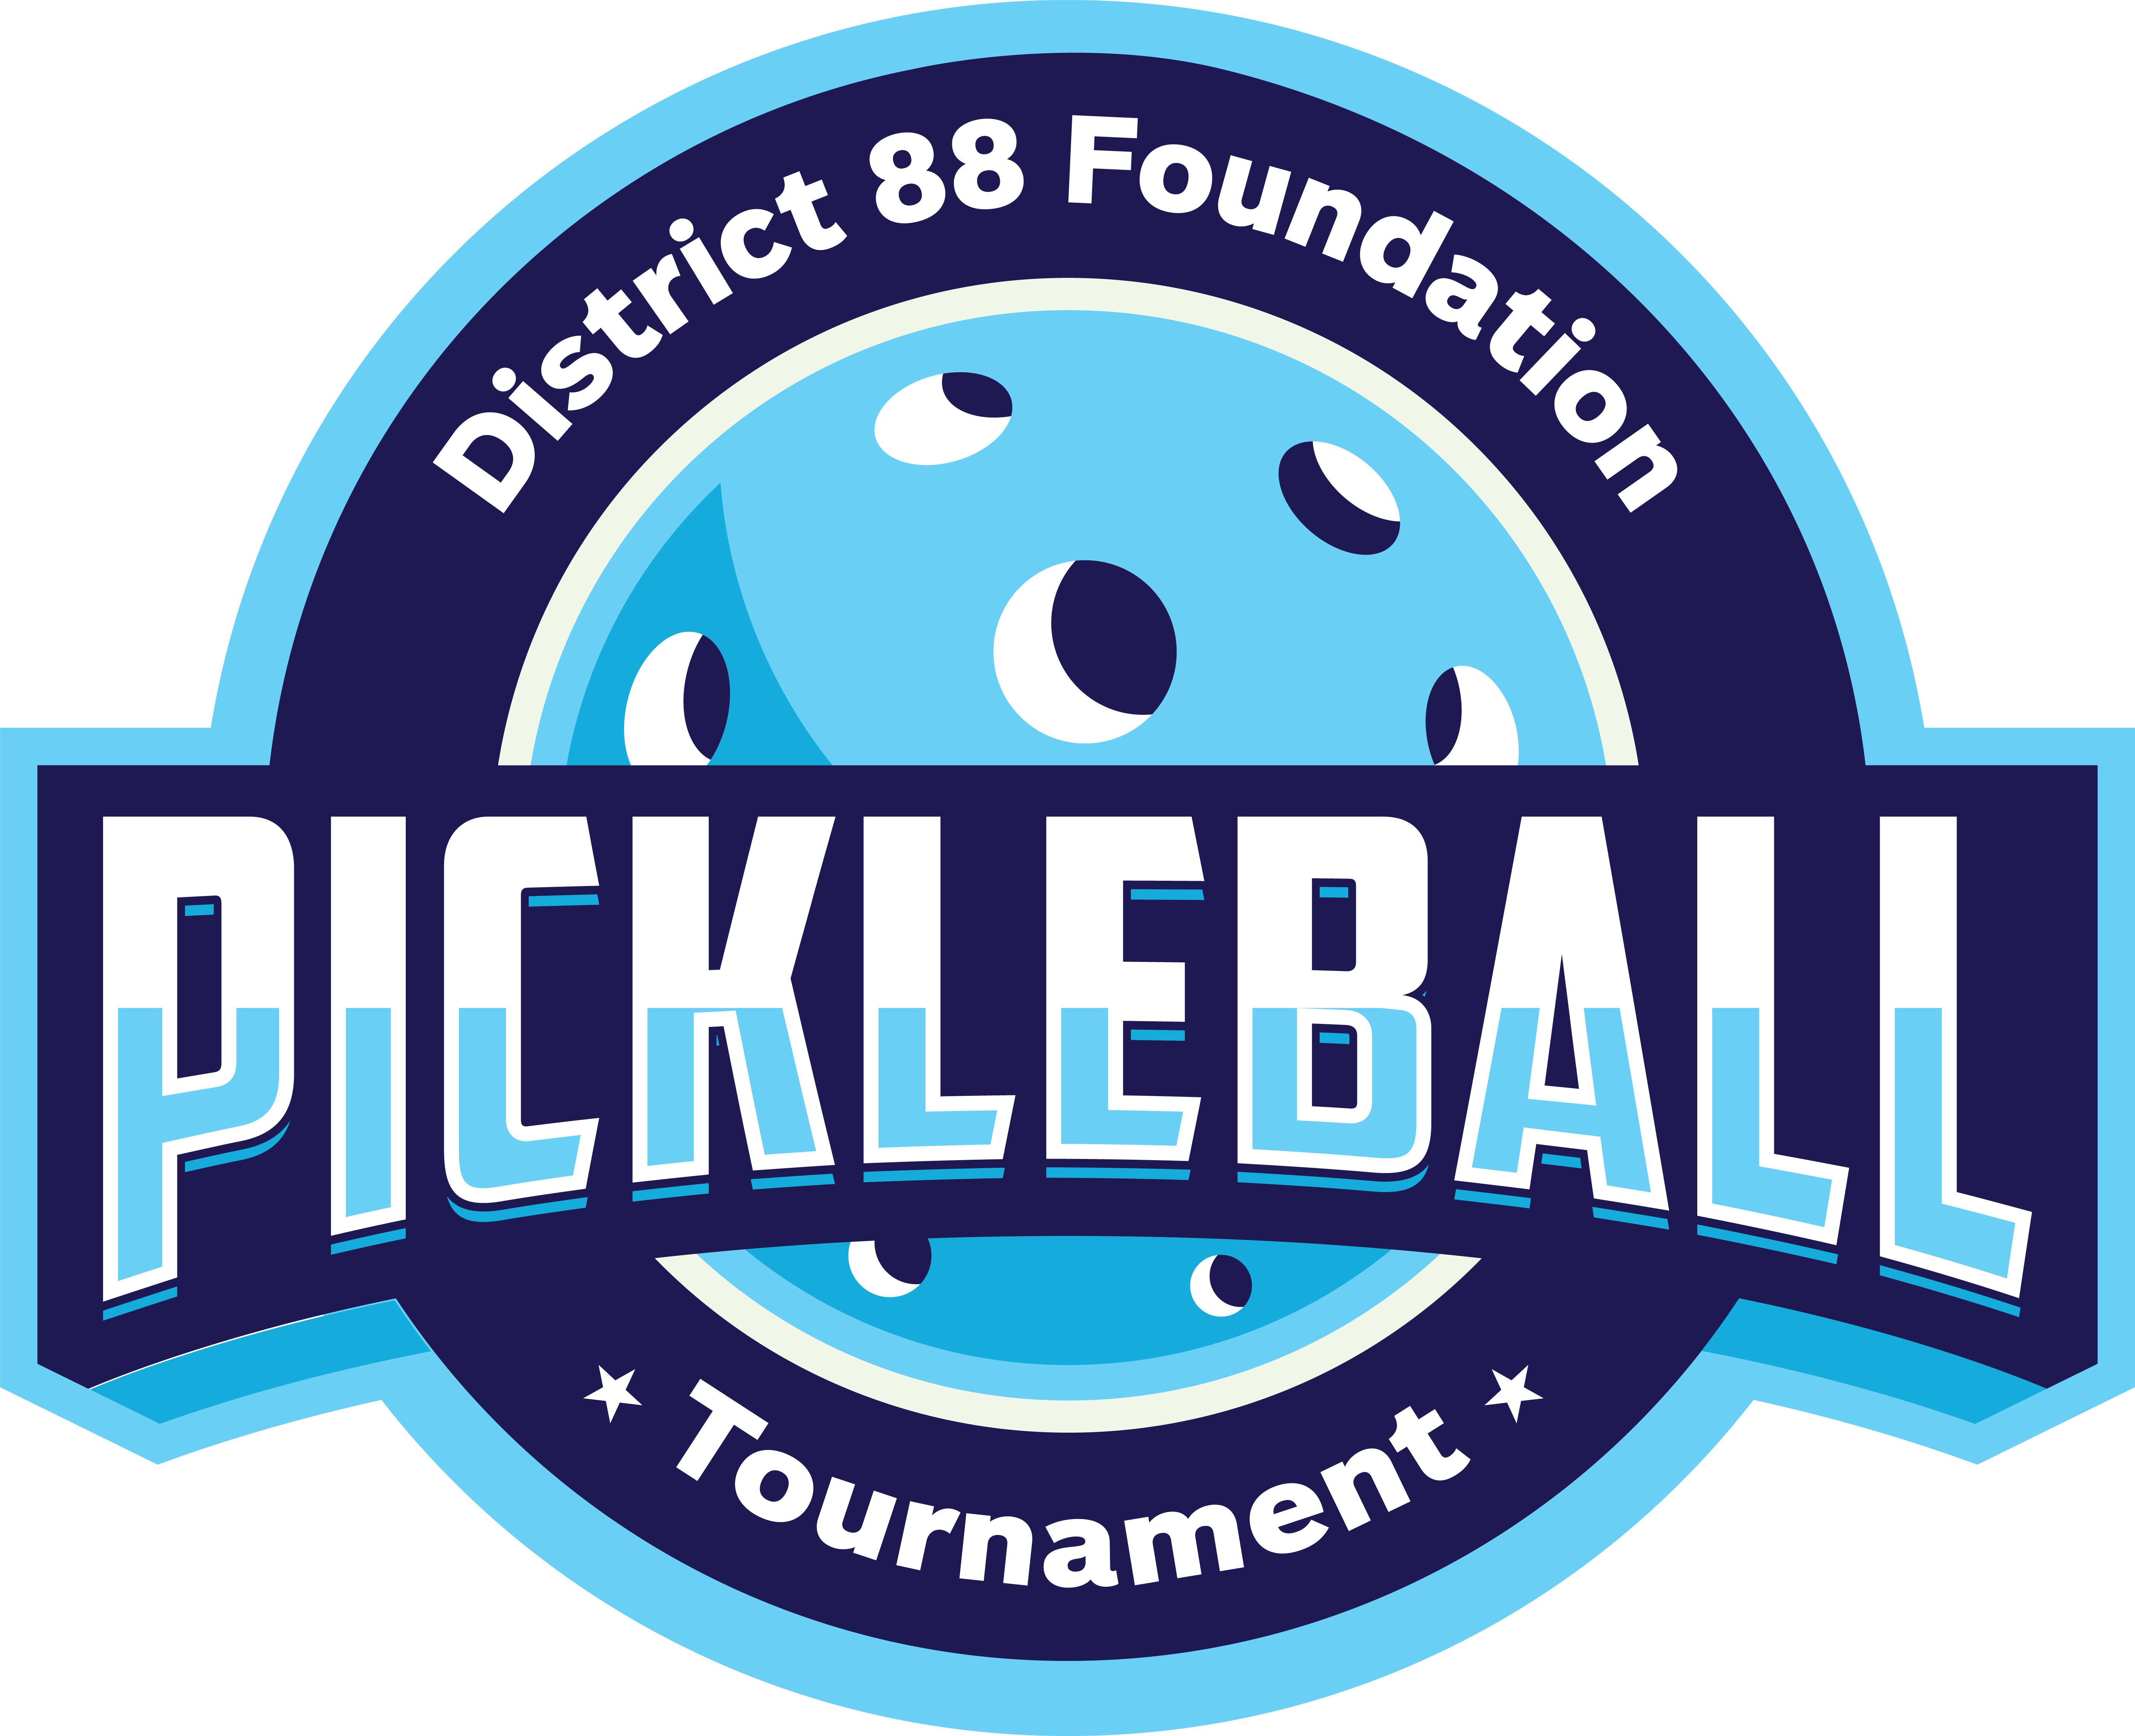 Thank you for supporting the District 88 Foundation's first 'Paddle Battle' pickleball tournament